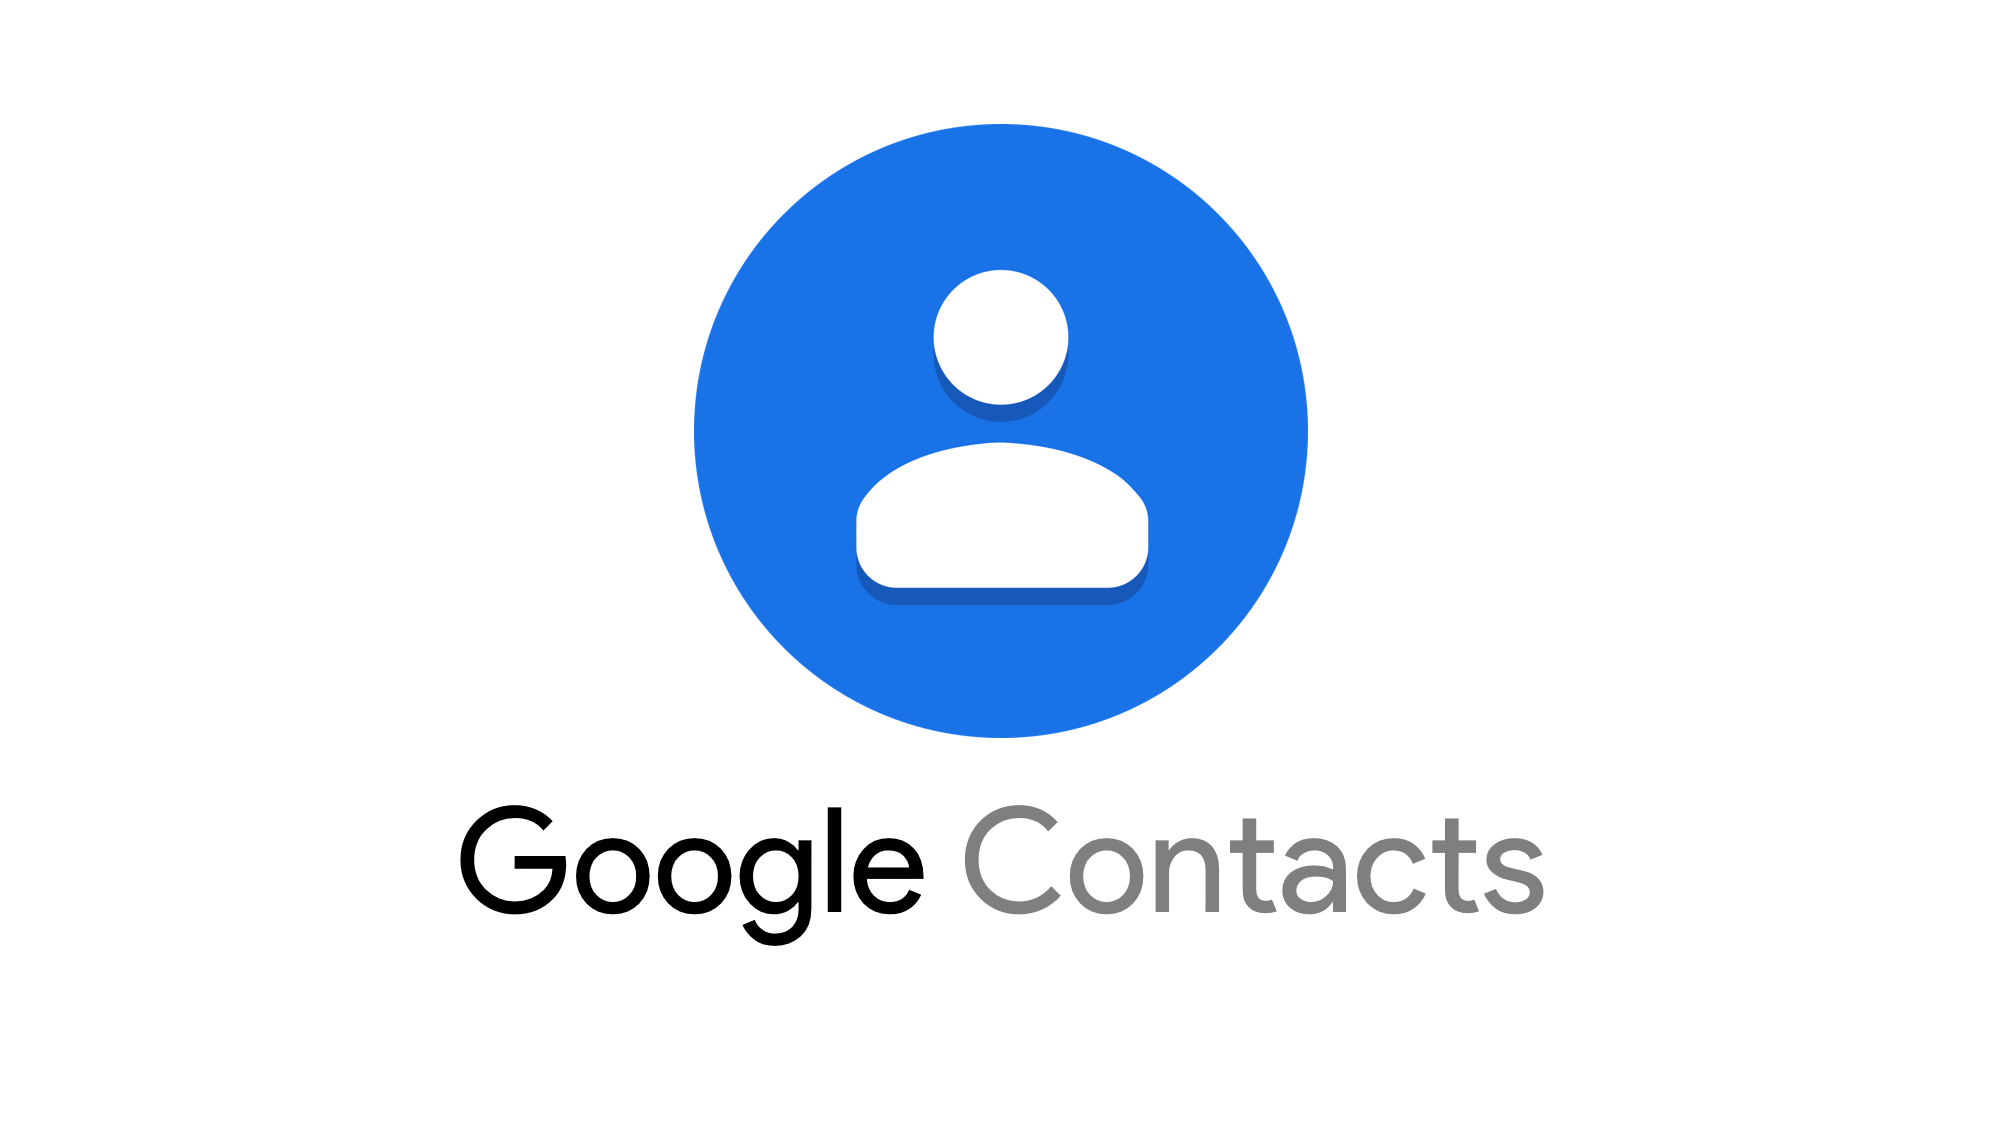 Google Contacts Introduces a New Feature: Locating Friends and Family on the Map